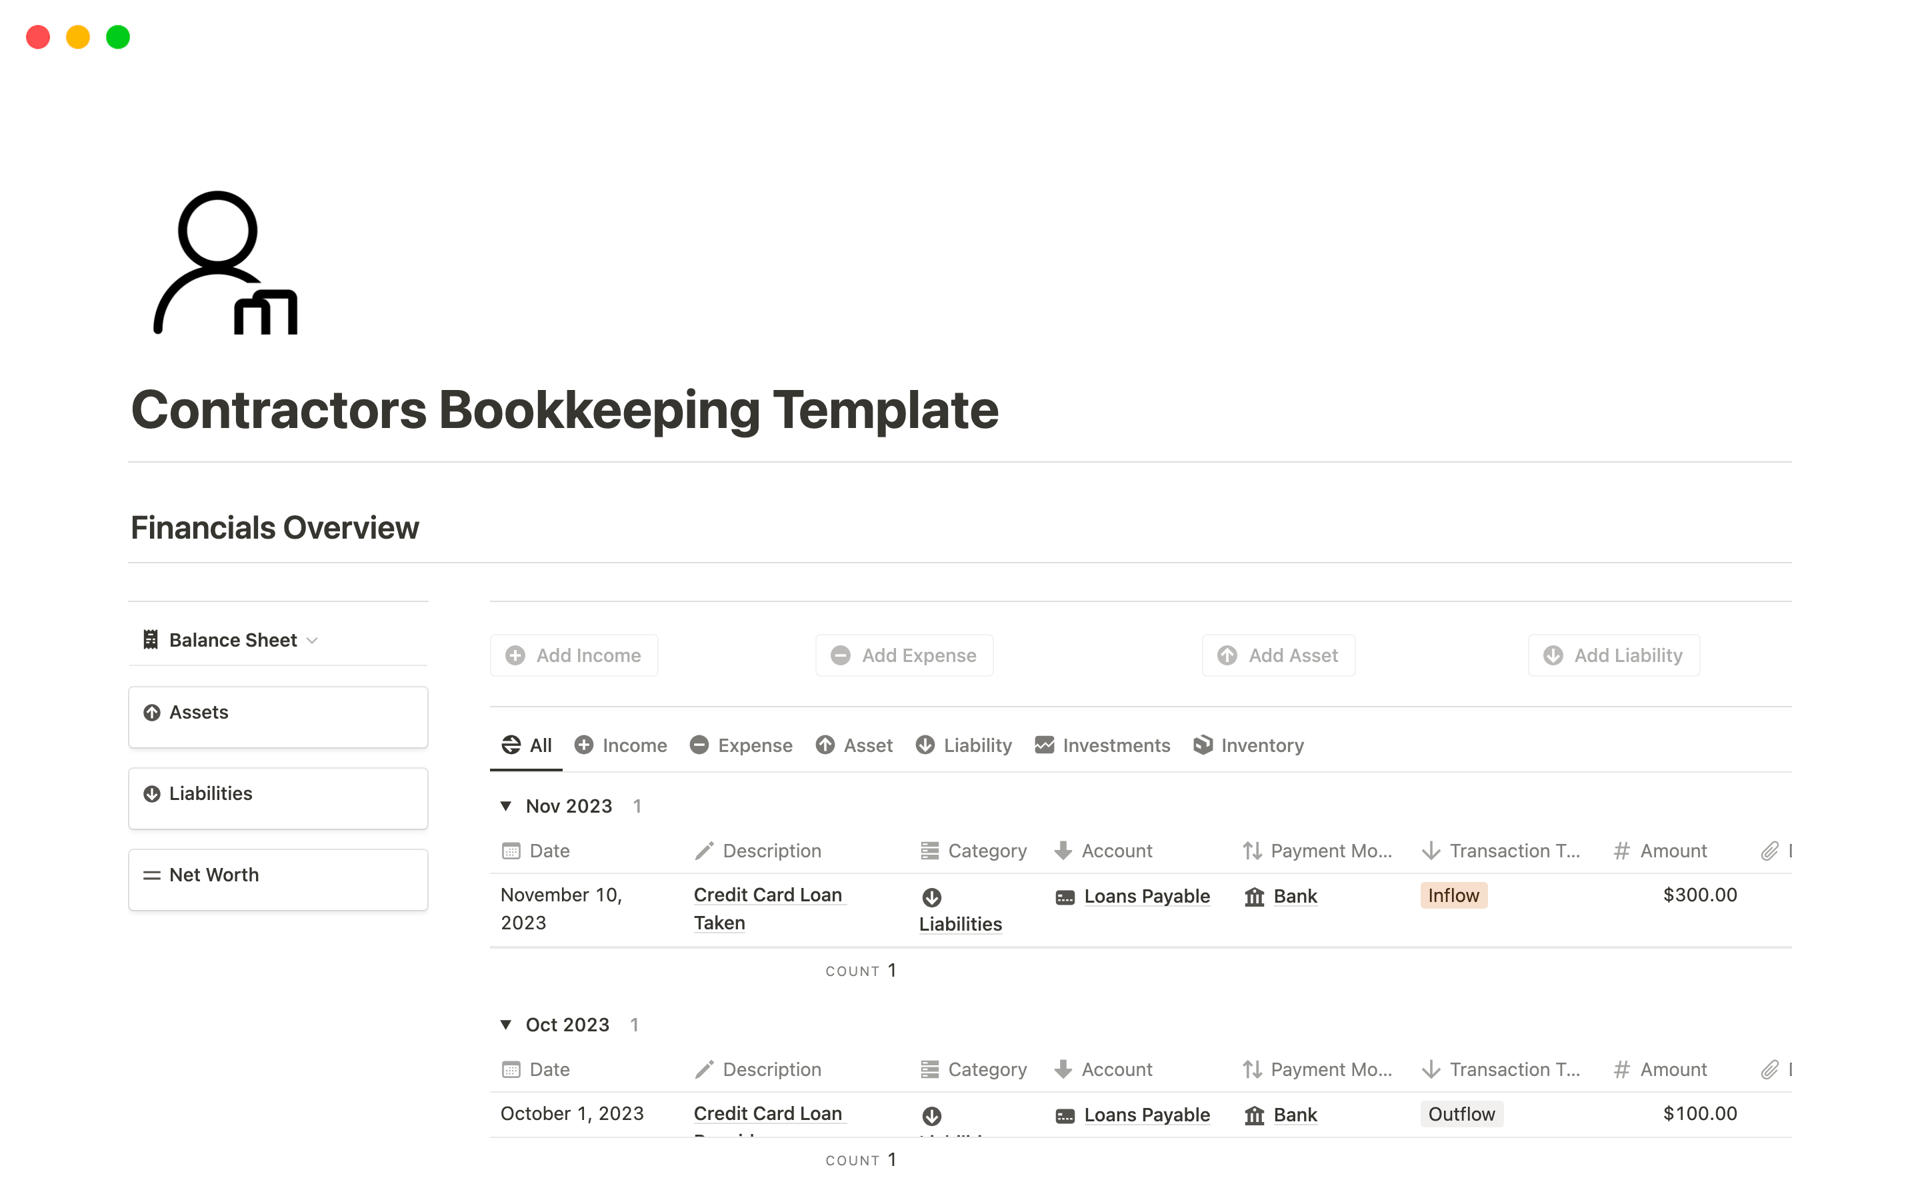 This bookkeeping template provides best solution for contractors to manage their business finances, produce income statement, balance sheet, cash flow statement and much more on a periodical basis.